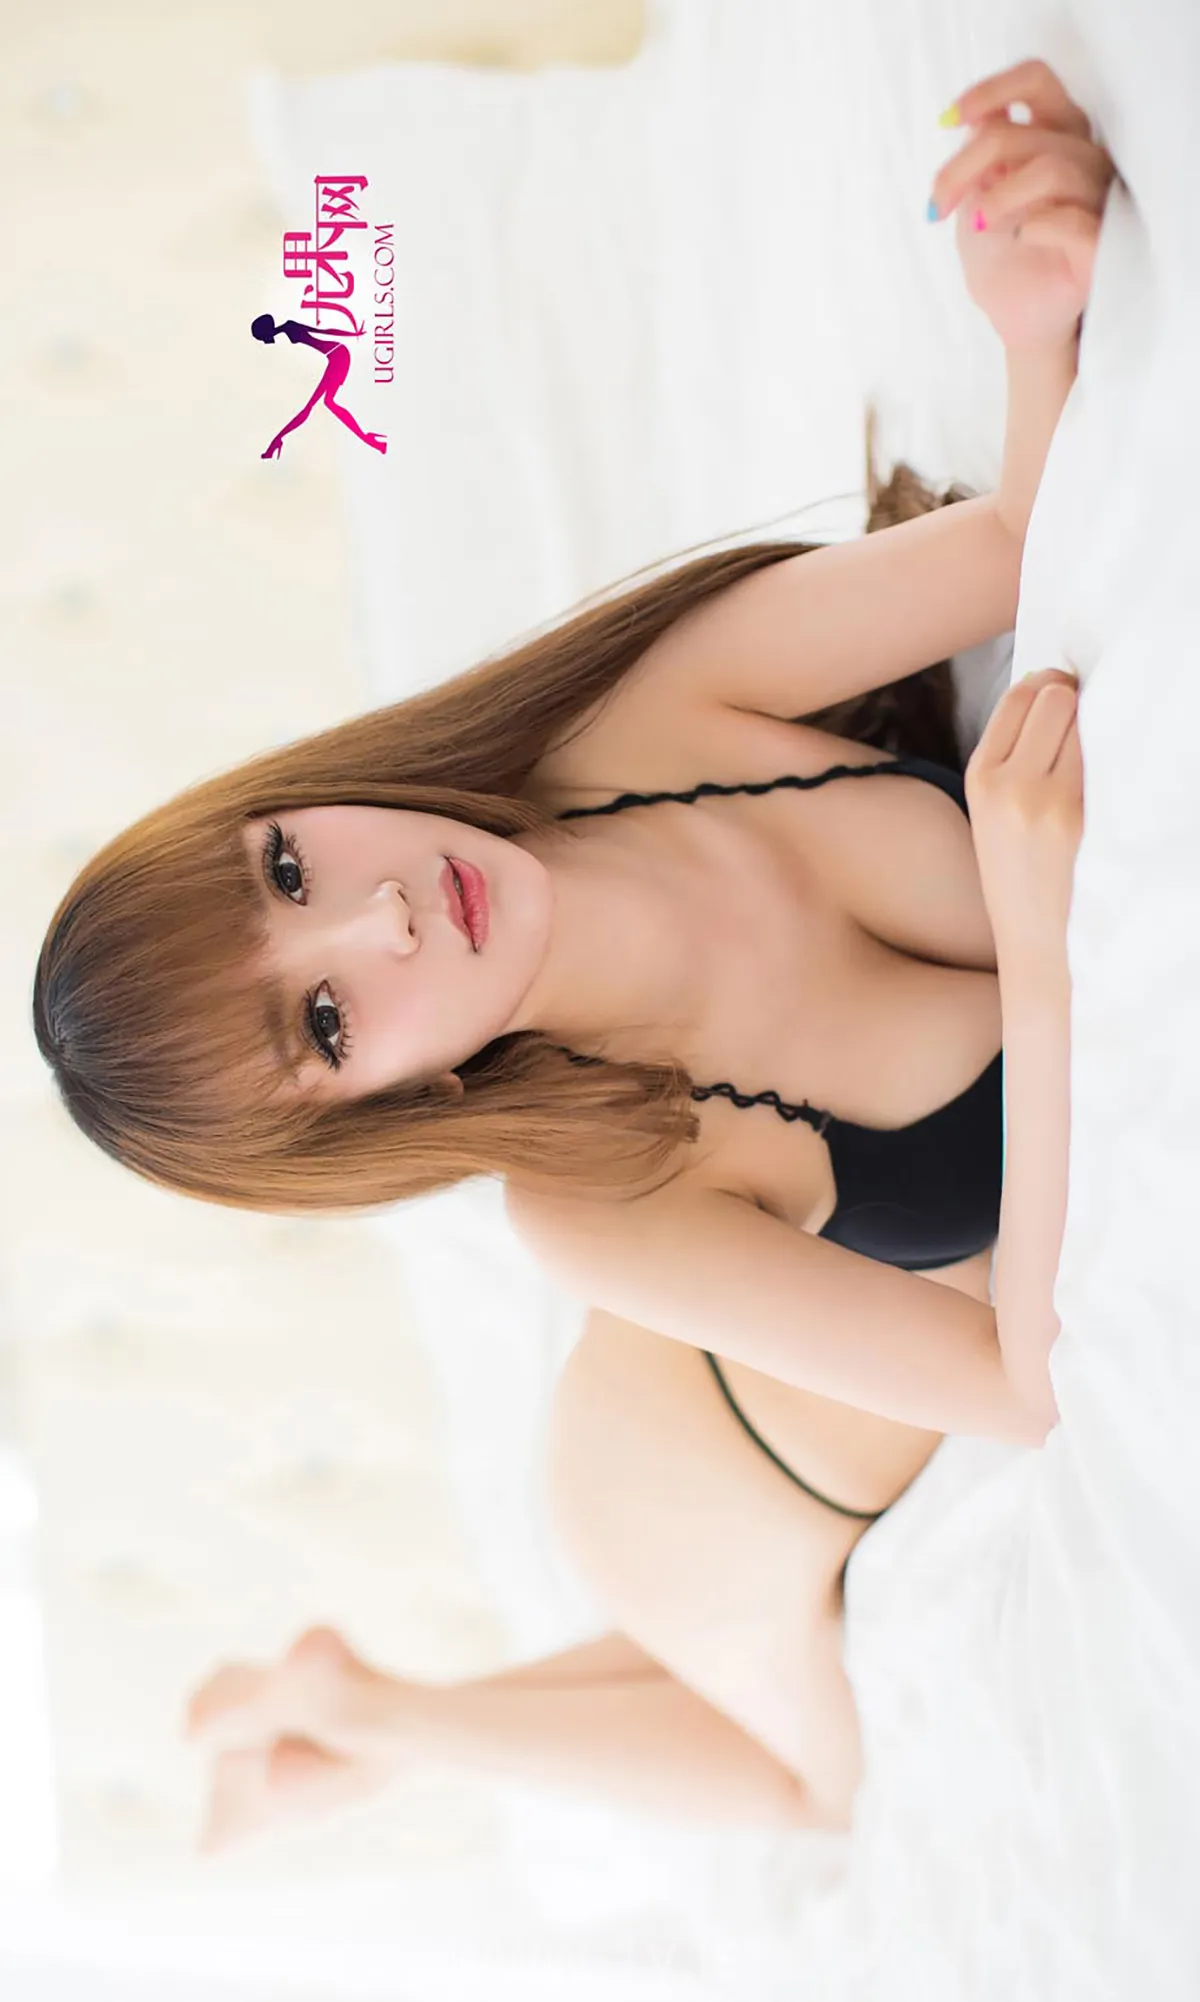 UGIRLS NO.157 Adorable & Appealing Chinese Women 小潘鼠